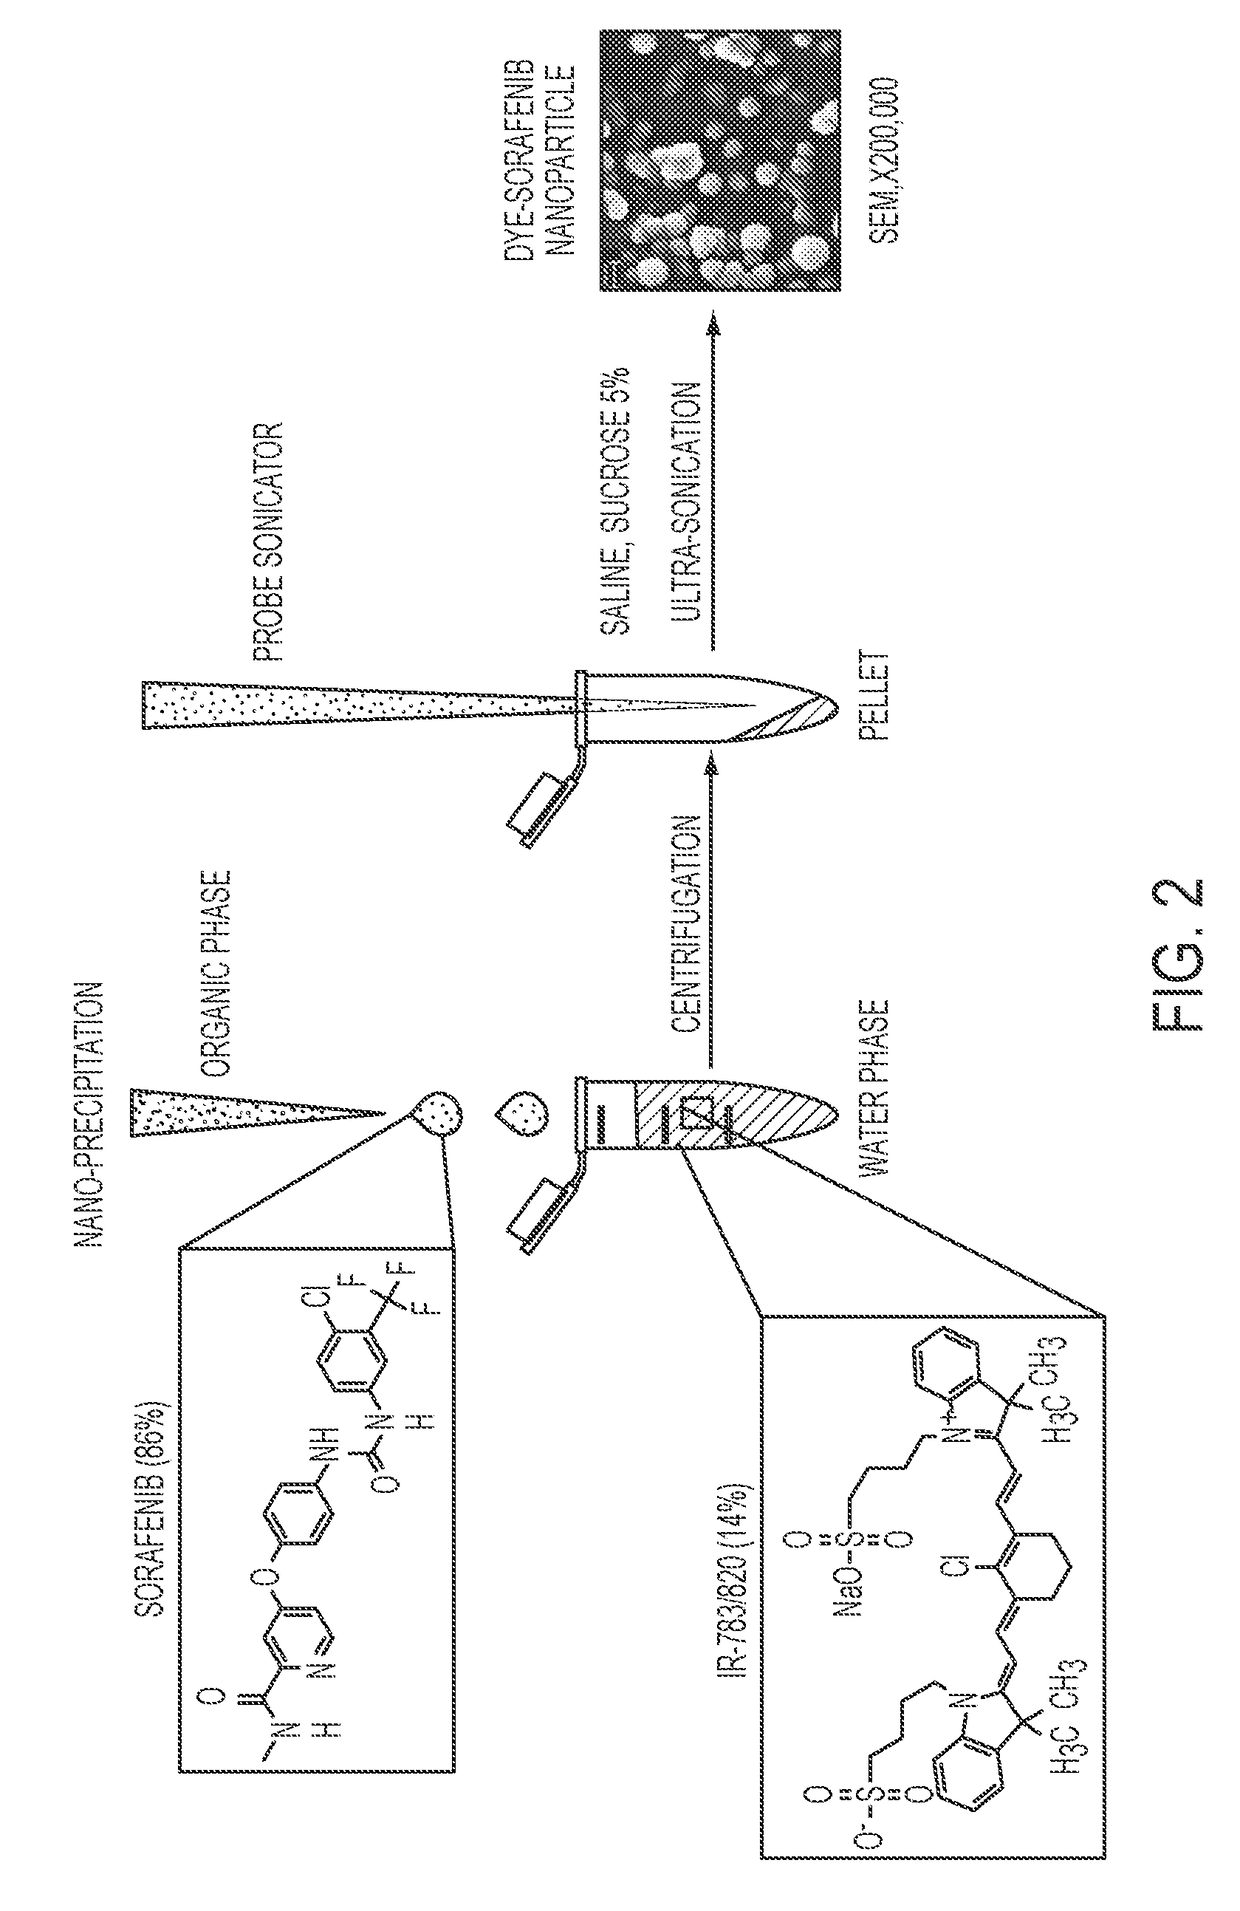 Dye-stabilized nanoparticles and methods of their manufacture and therapeutic use